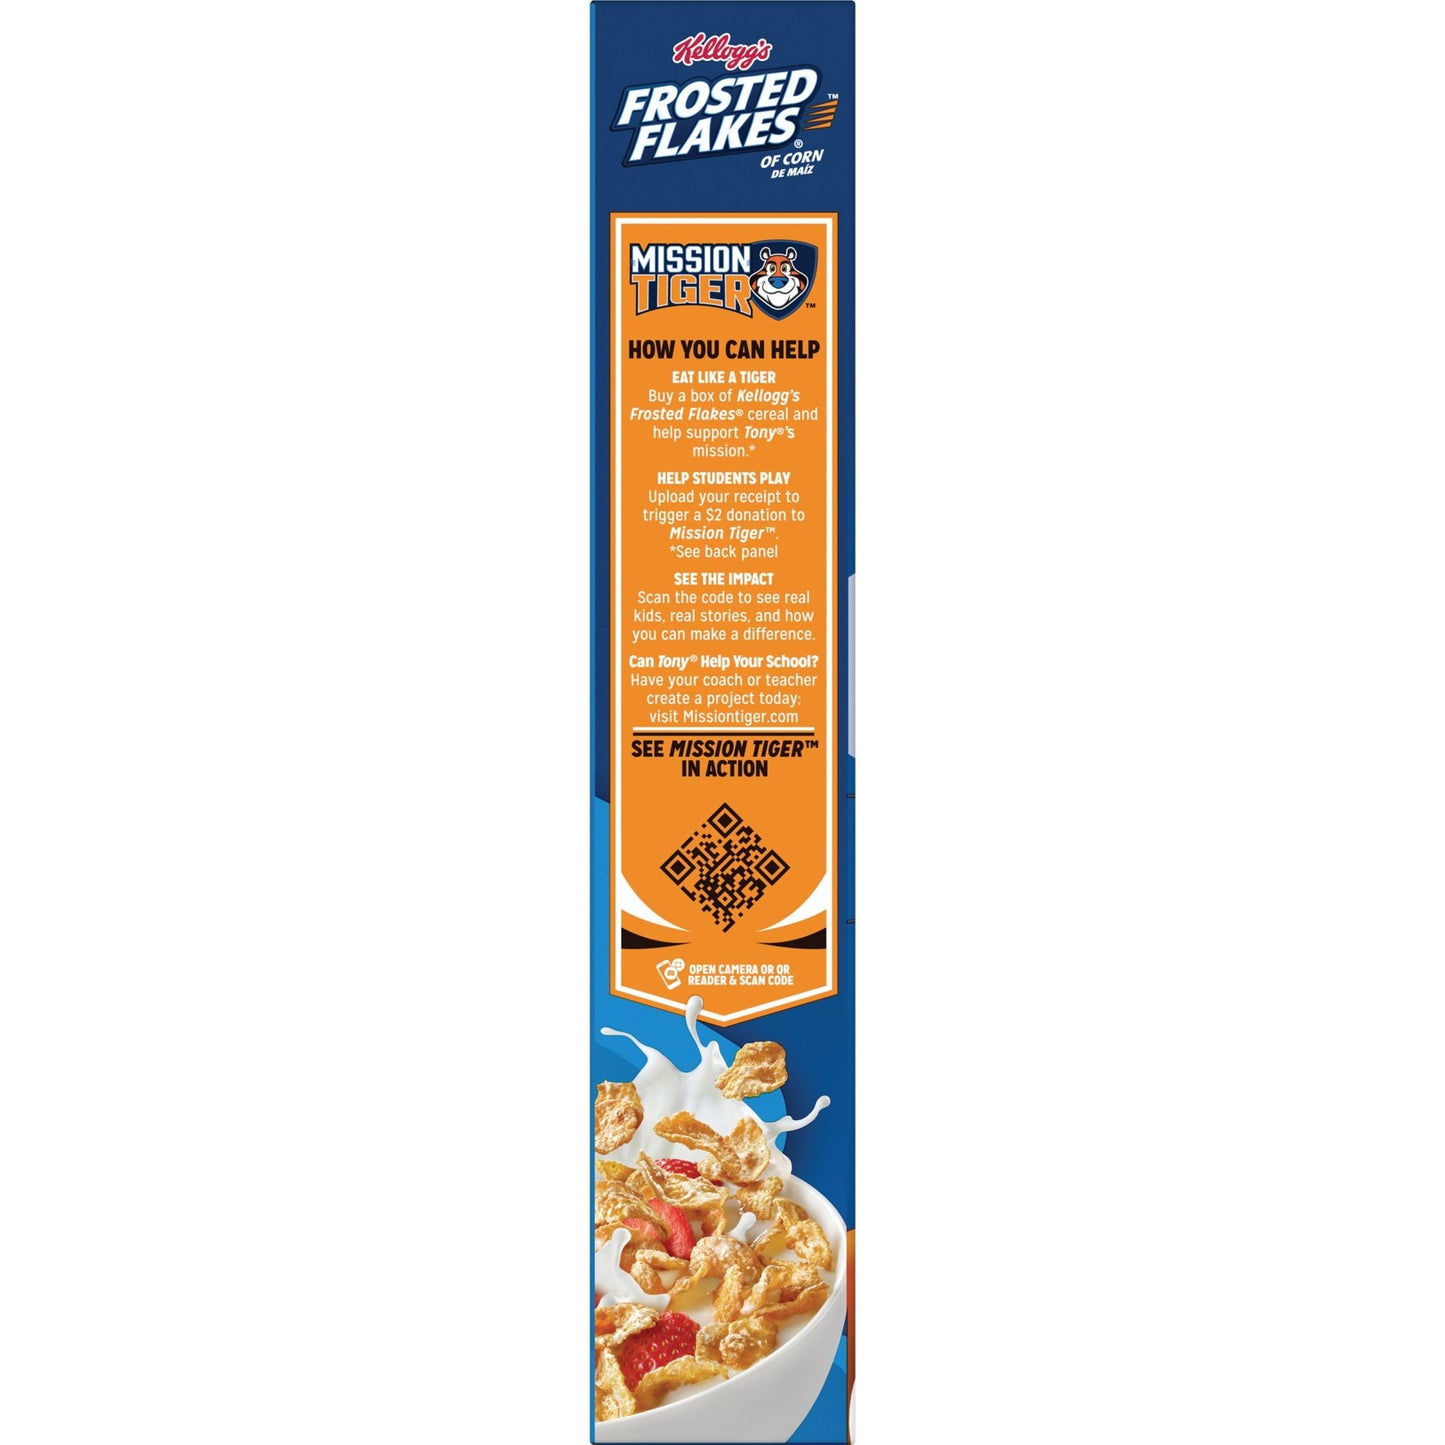 Kellogg's Frosted Flakes Original Breakfast Cereal, 12 oz Box